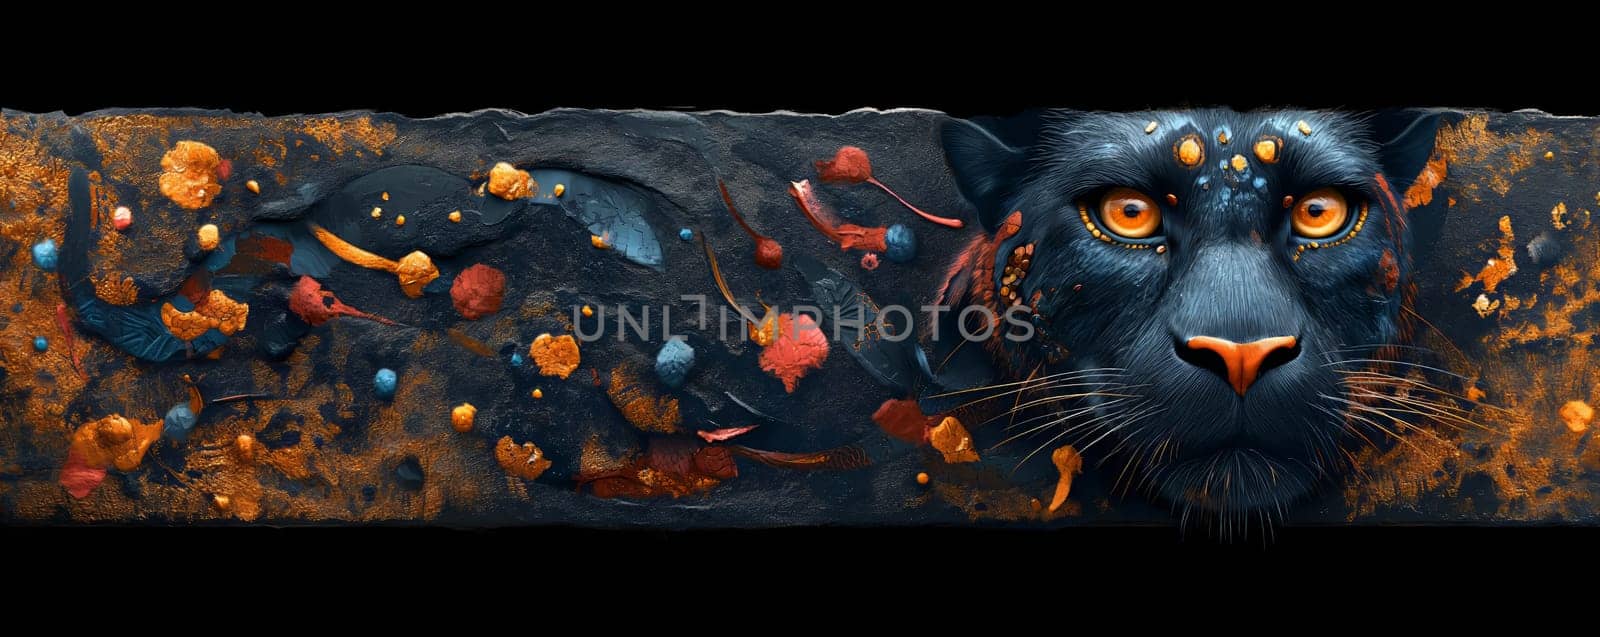 A painting of a black cat with striking orange eyes.